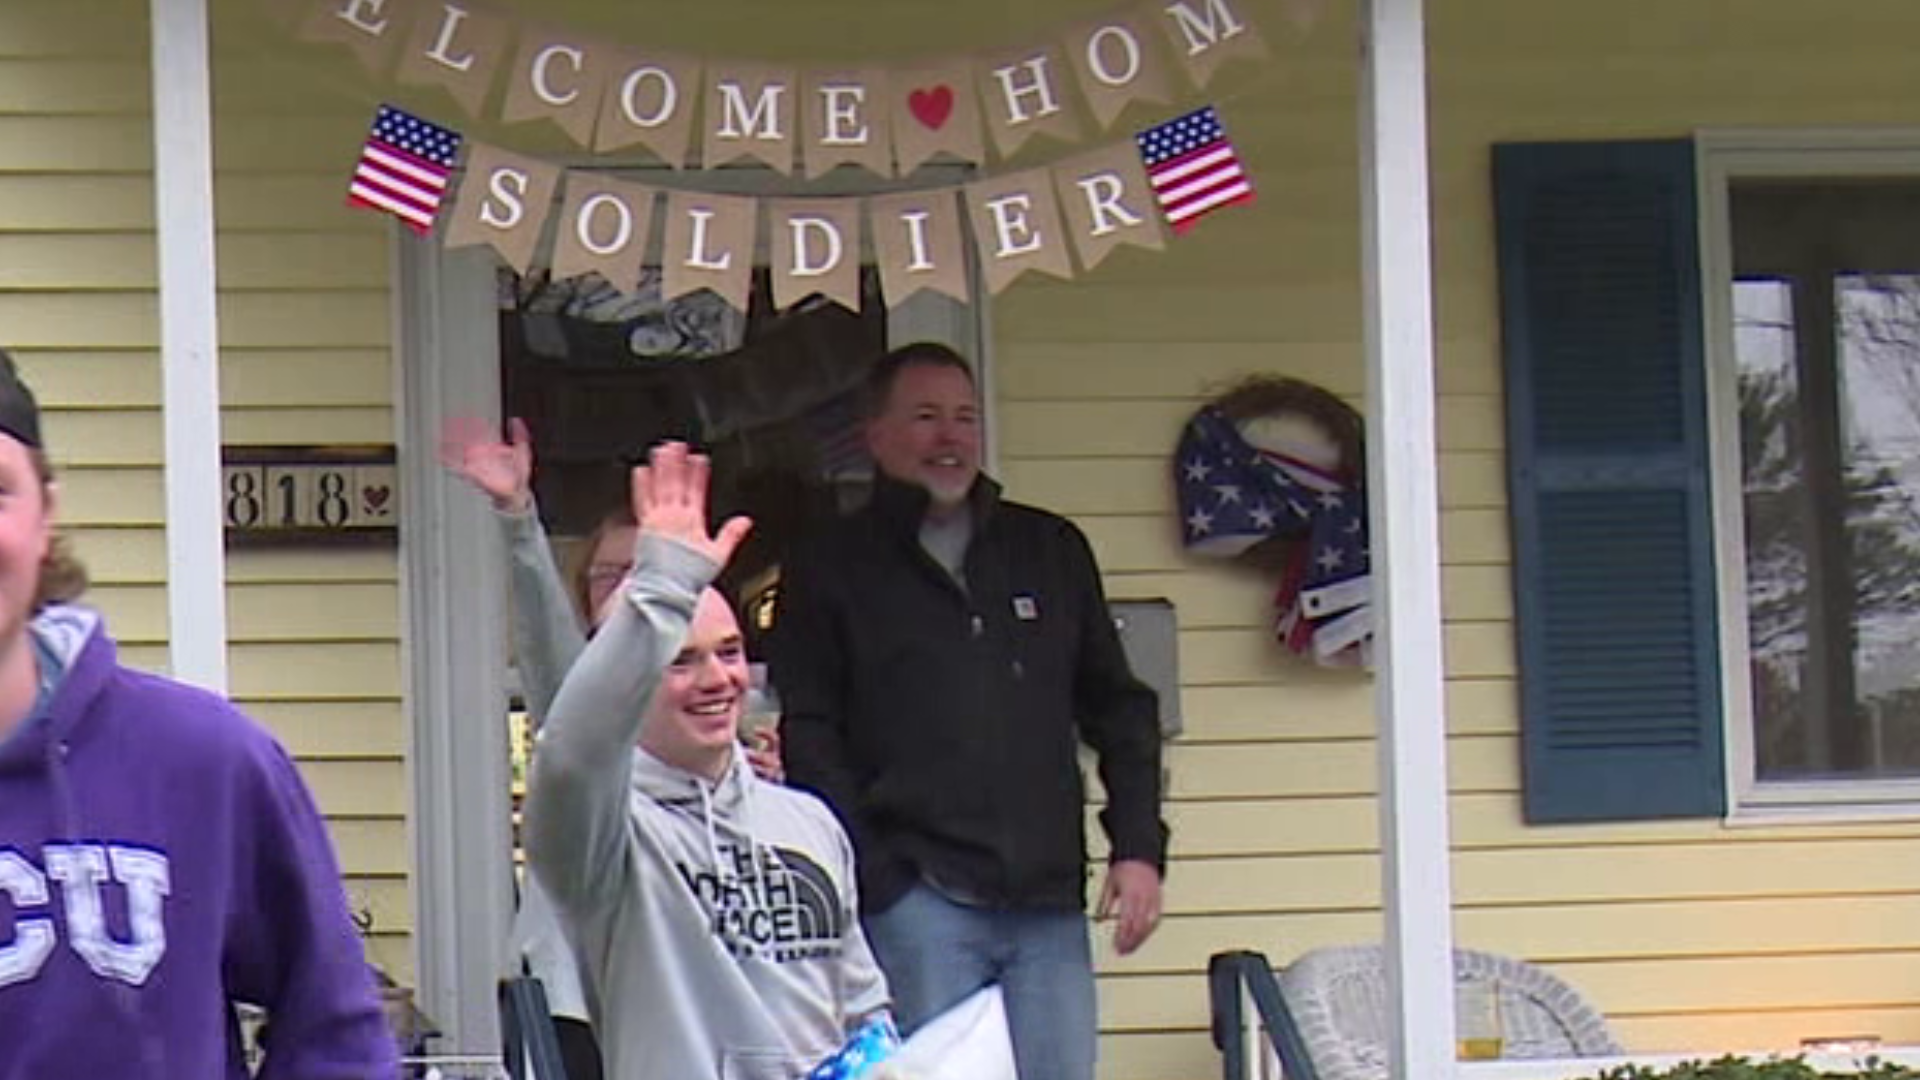 A parade was held in honor of a hometown hero.